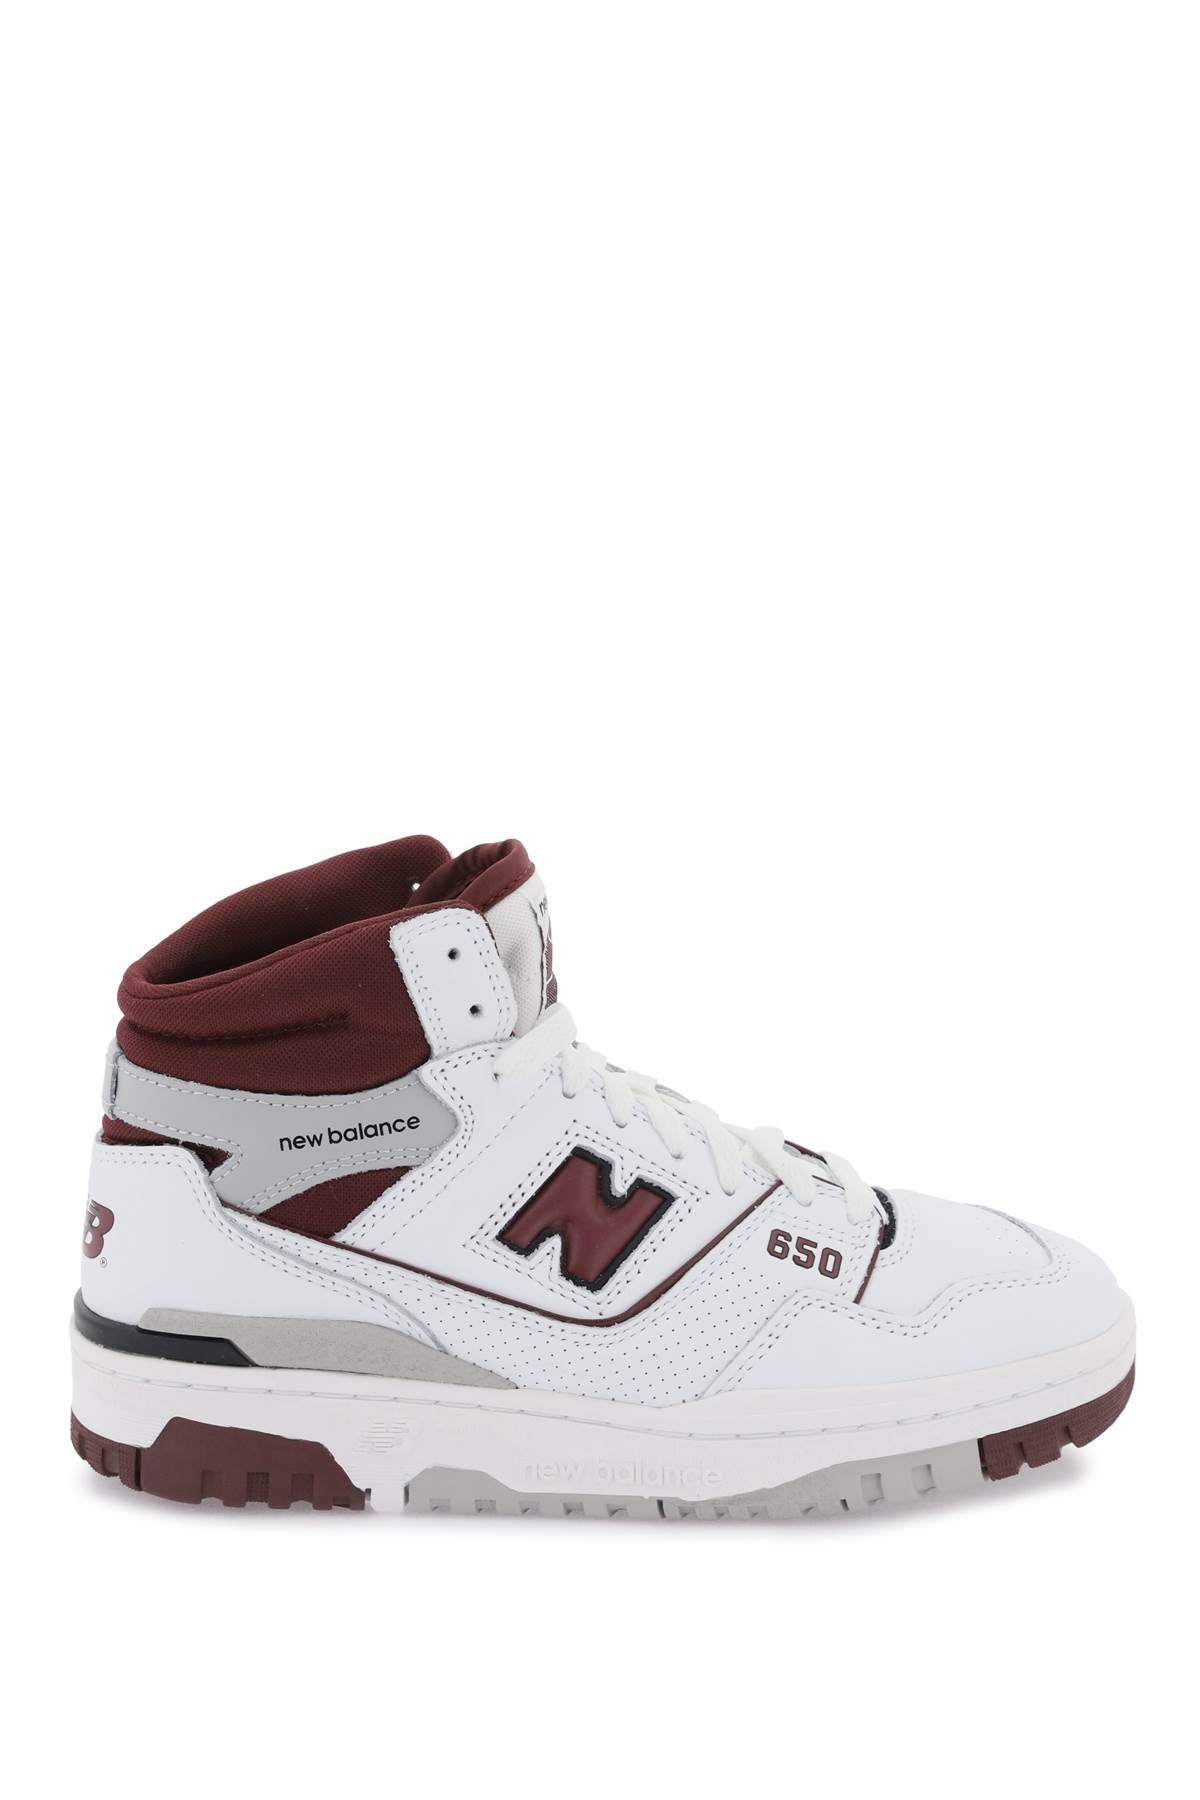 New balance 650 sneakers-0